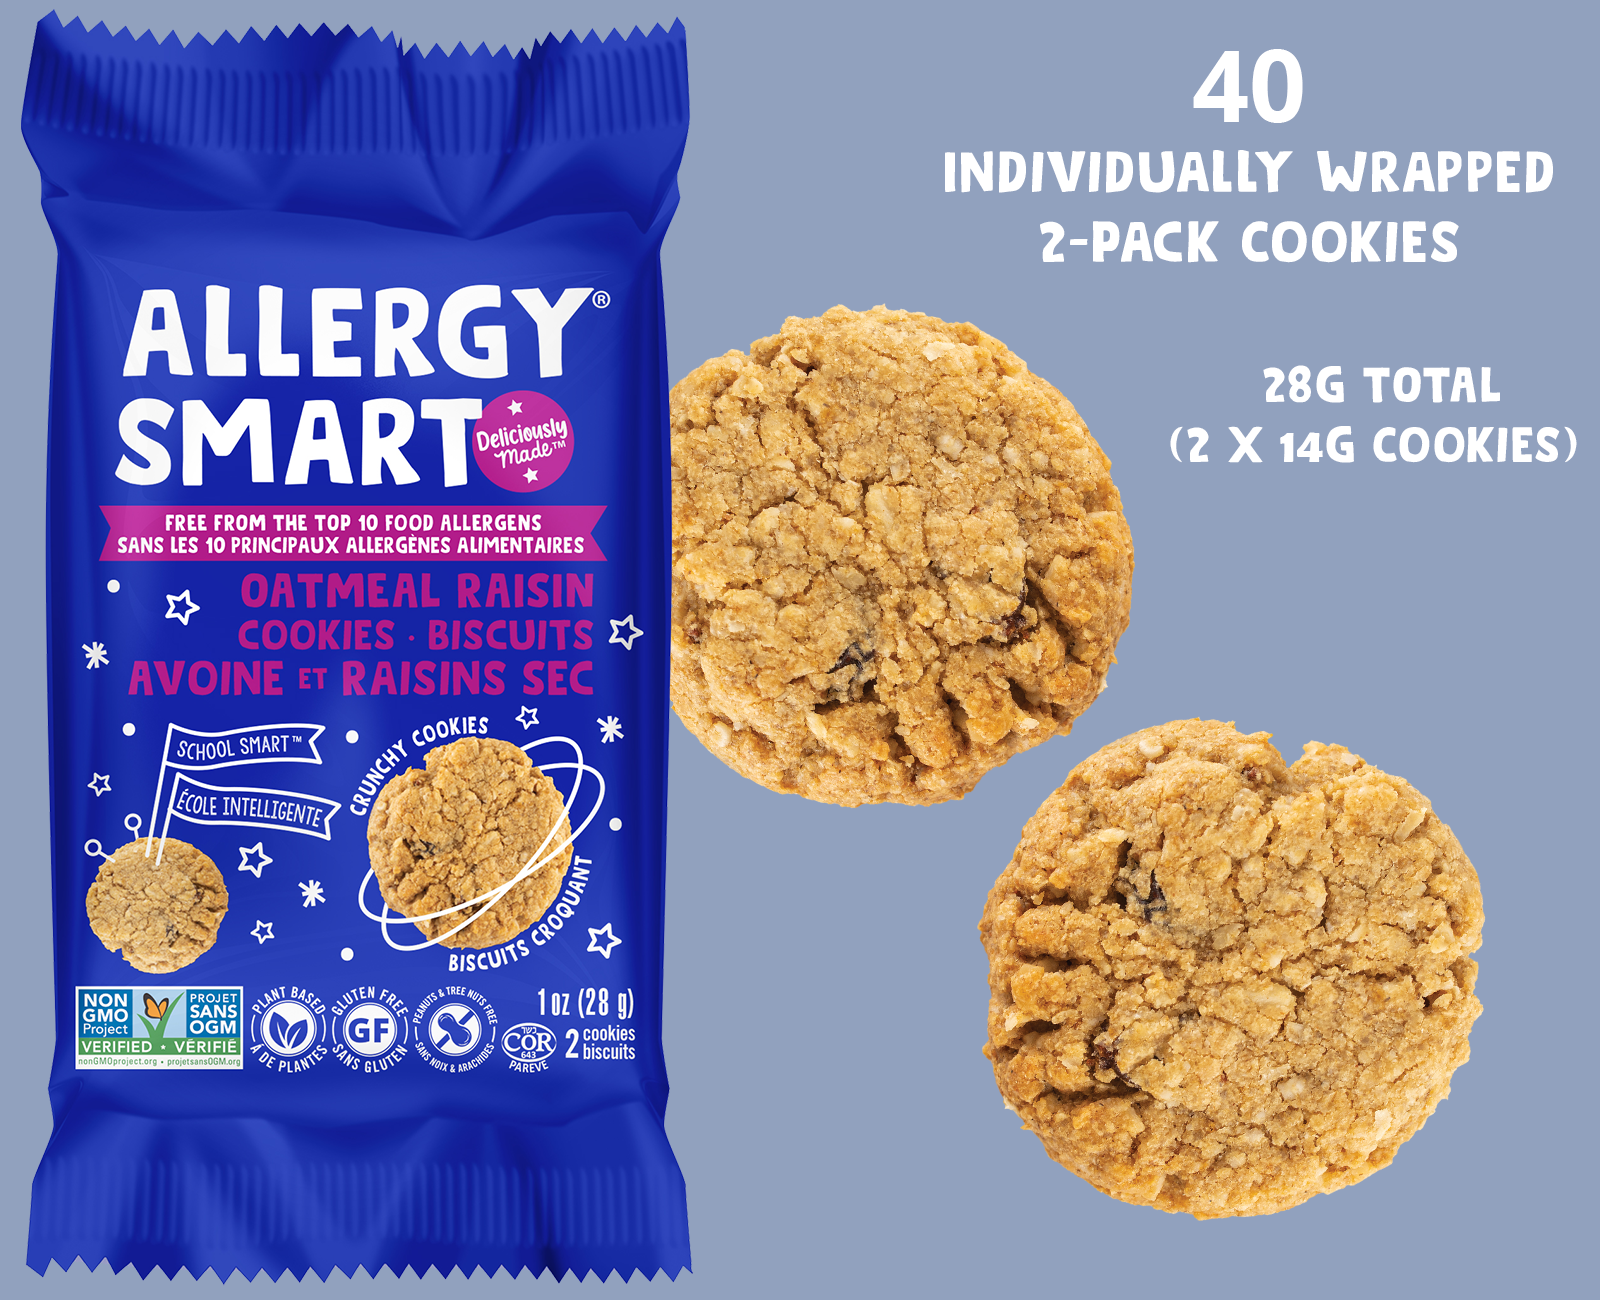 40 Individually Wrapped 2-Pack Cookies | Oatmeal Raisin